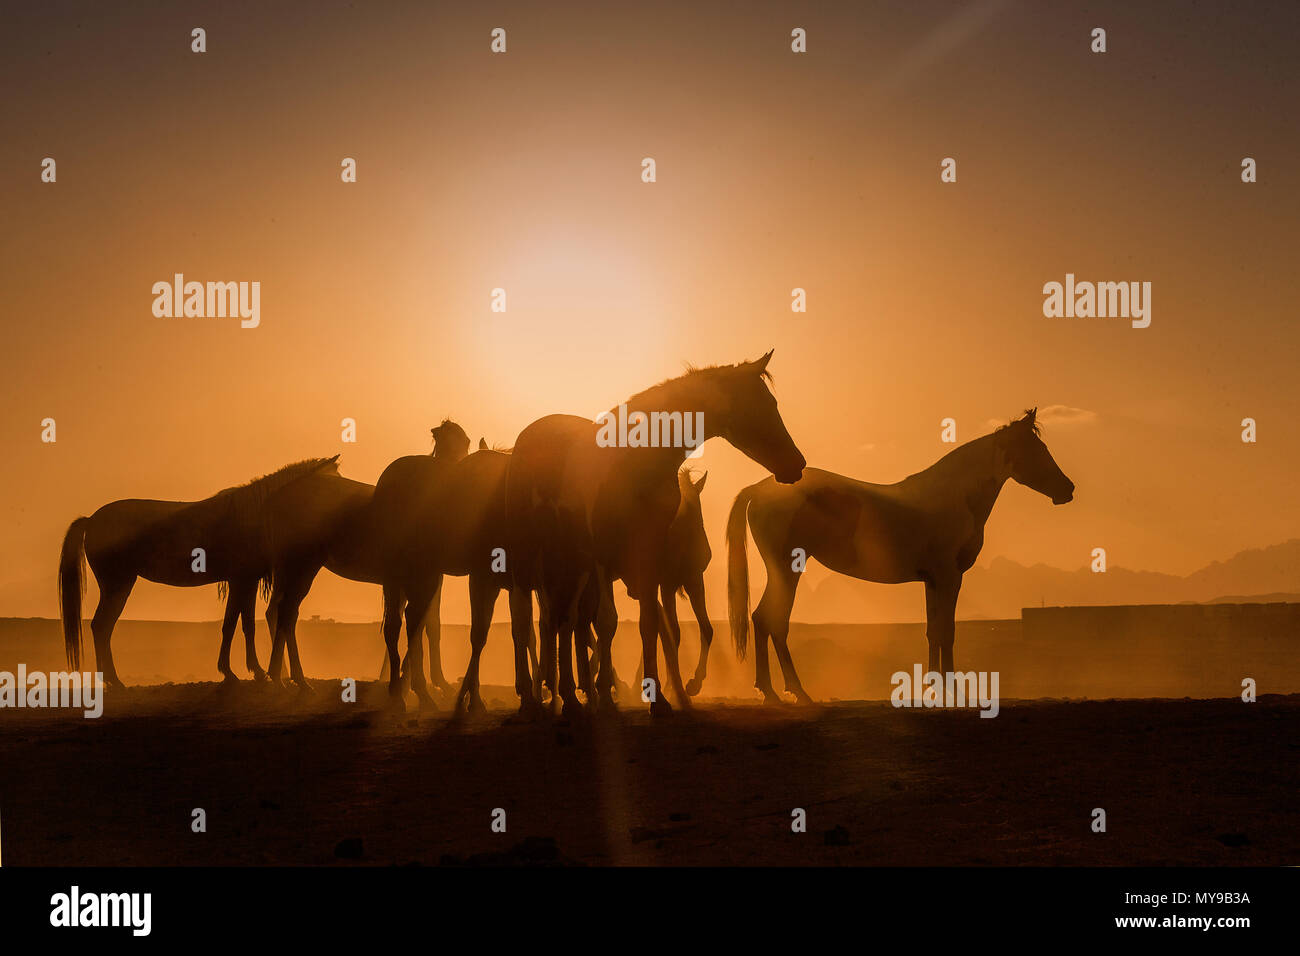 Arabian Horse. Group of juvenile mares standing in the desert, silhouetted against the setting sun. Egypt Stock Photo